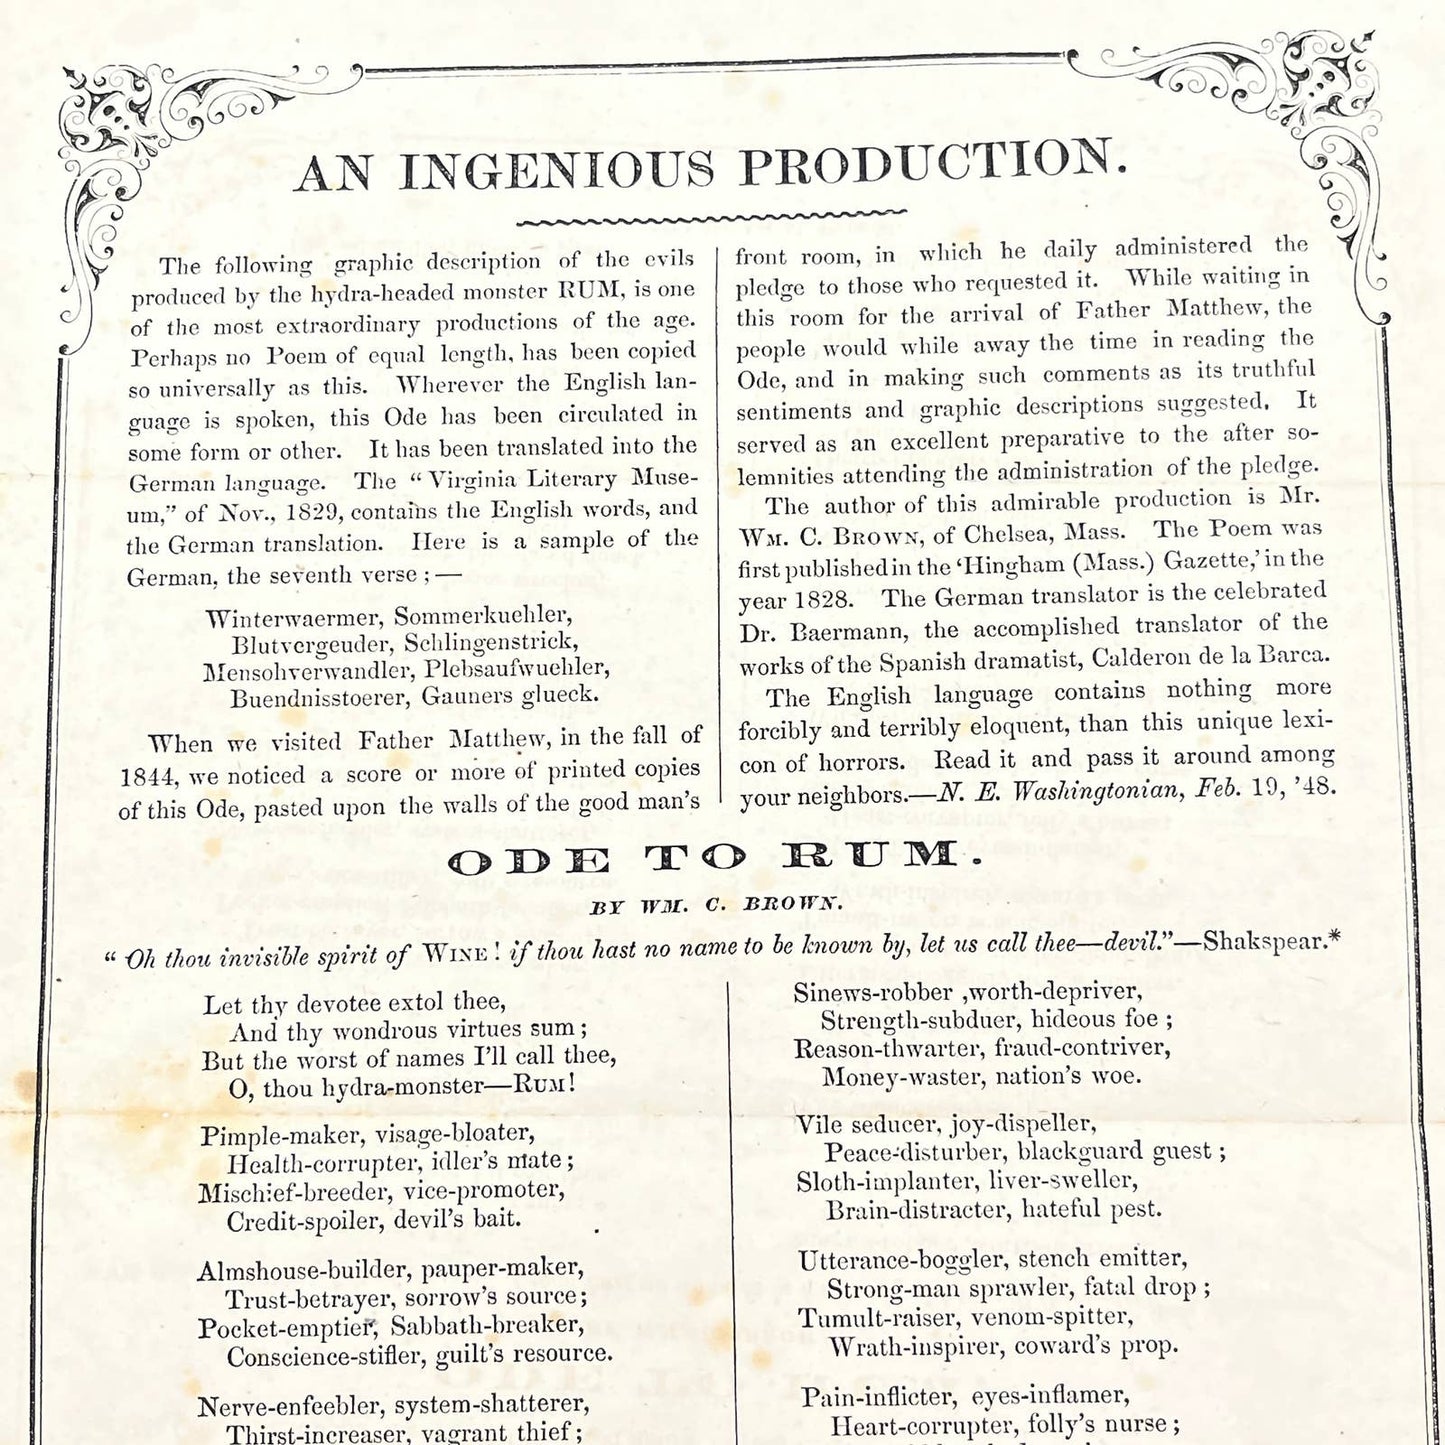 1848 Leaflet About The Evils of Rum W.M. C. Brown Ode to Rum AB7